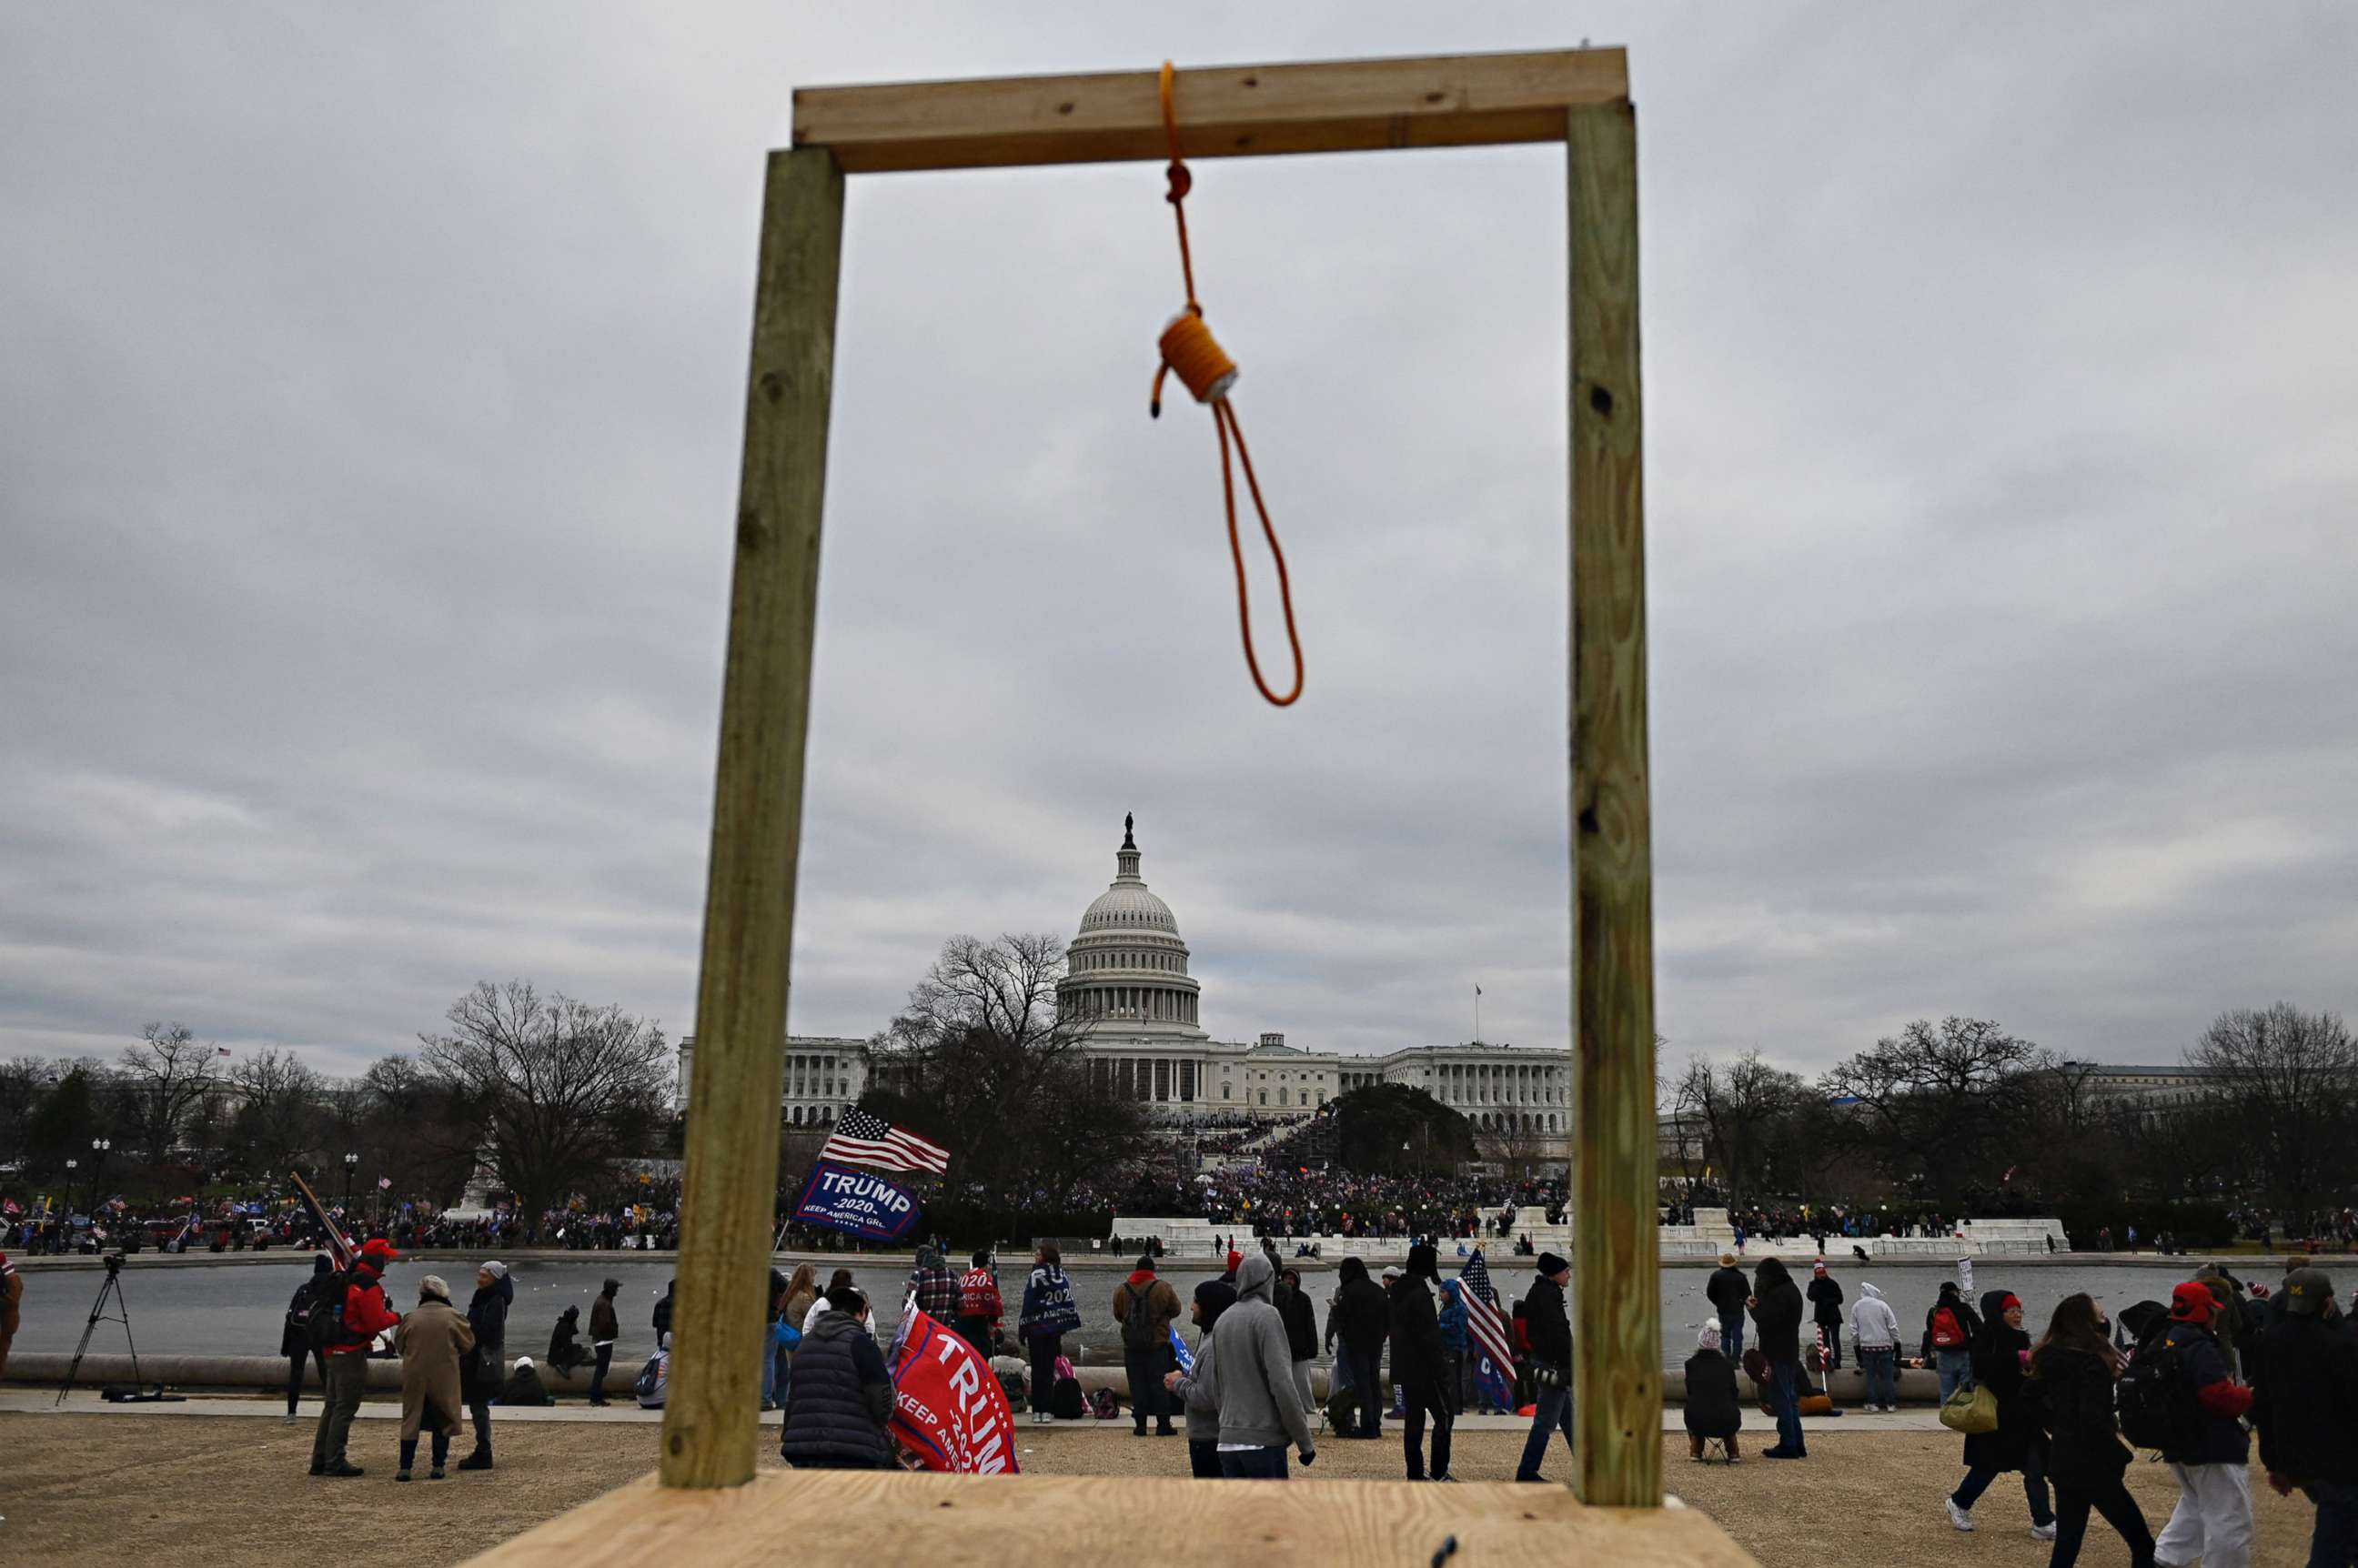 PHOTO: In this Jan 6, 2021, file photo, a noose is seen near the U.S. Capitol as supporters of President Donald Trump gather on the west side of the building in Washington, D.C.